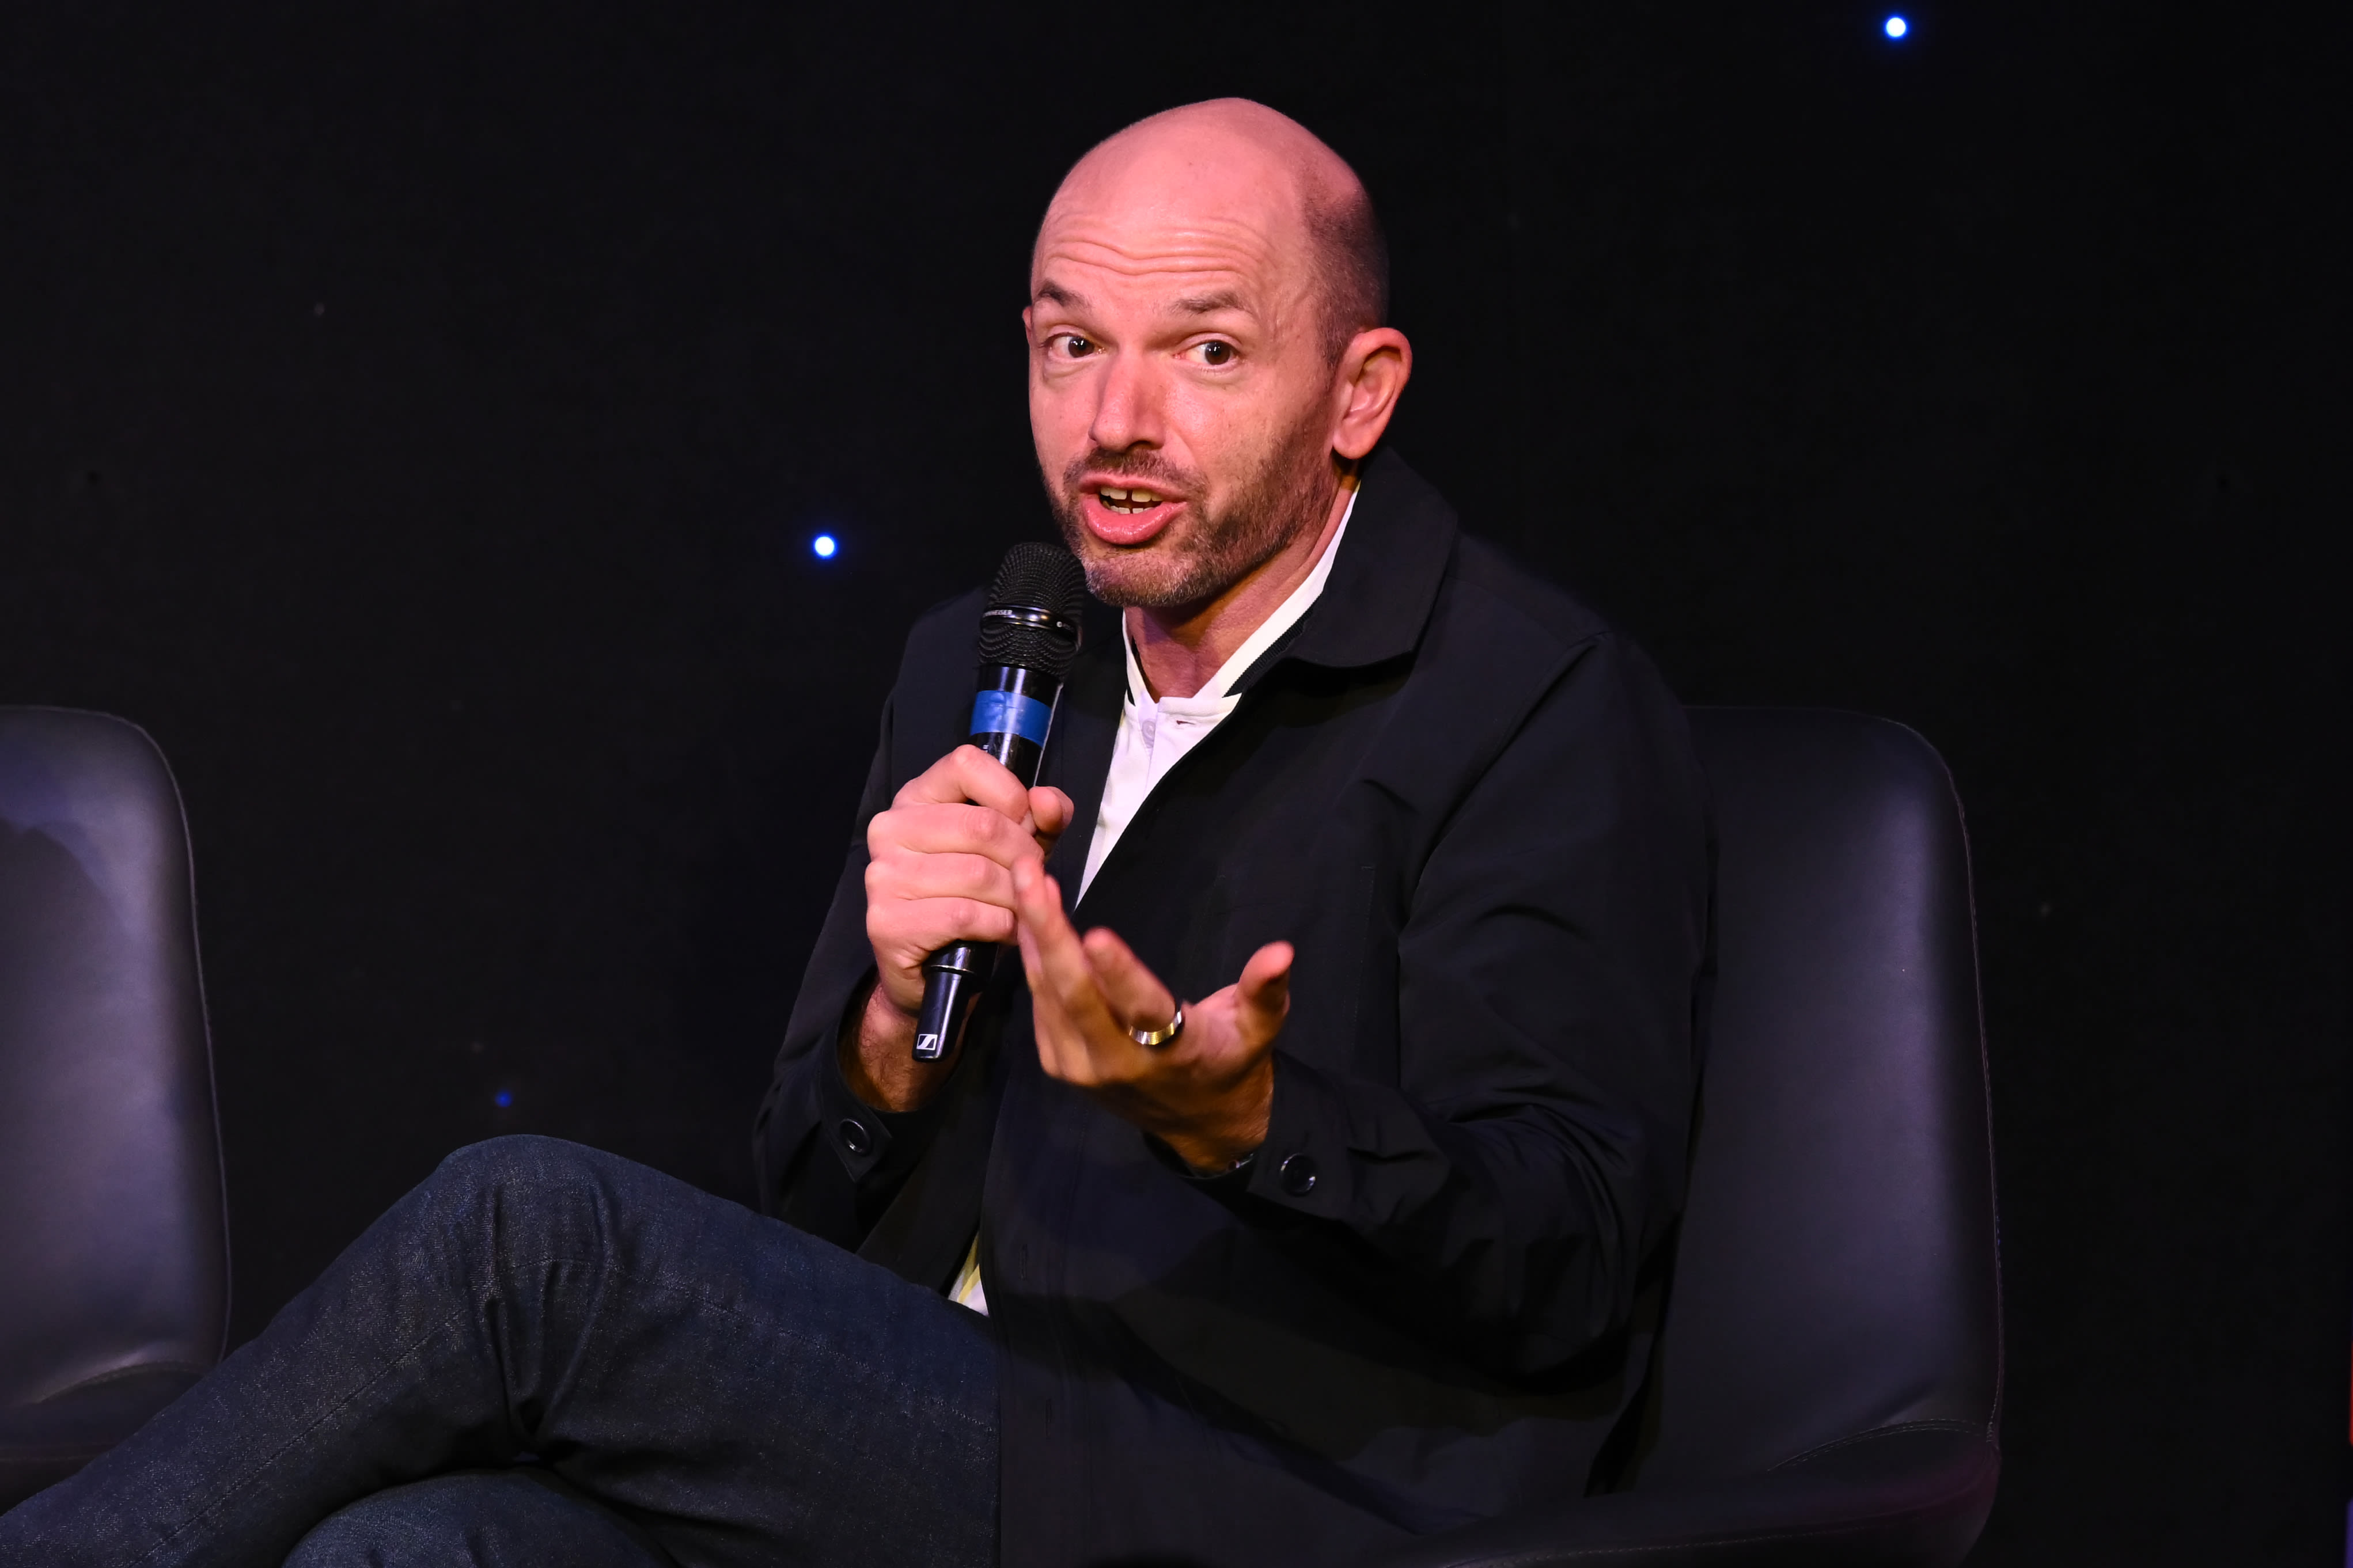 Comedian Paul Scheer Hadn’t Realized His Childhood Was Abusive. His New Memoir Examines His Pain With Humor: ‘I’m Not...